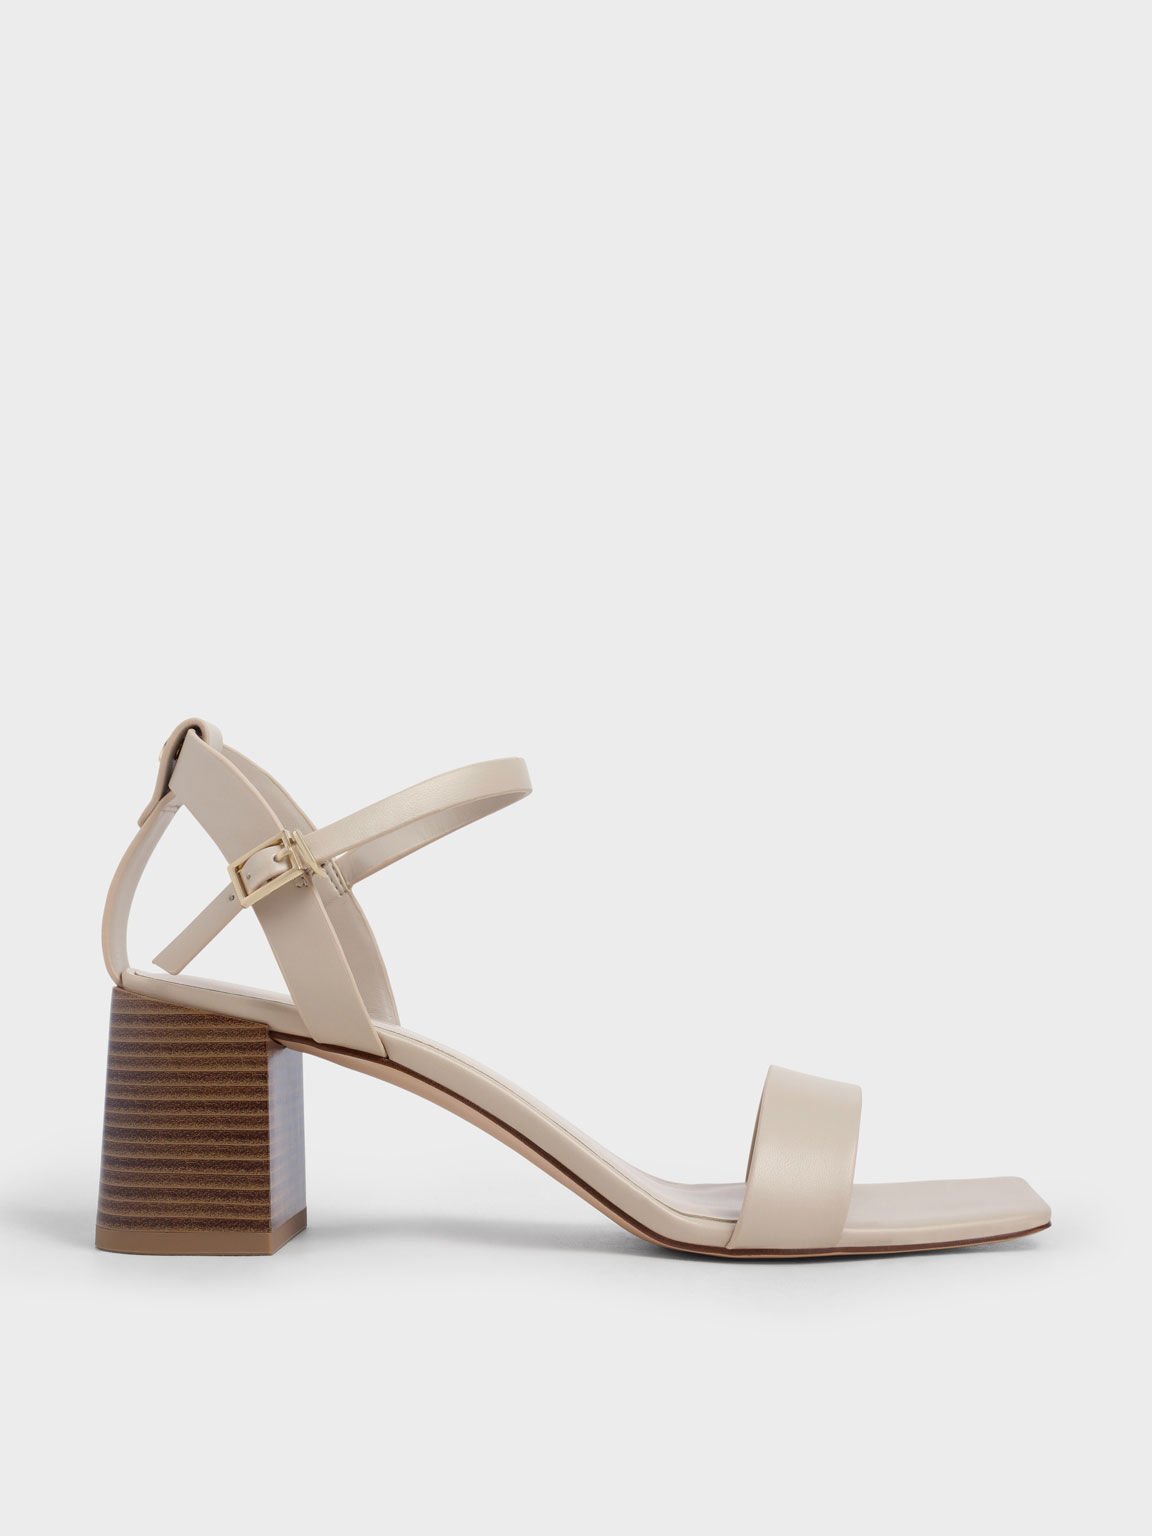 Charles & Keith Claire Leather Mary Jane Pumps In Beige | ModeSens